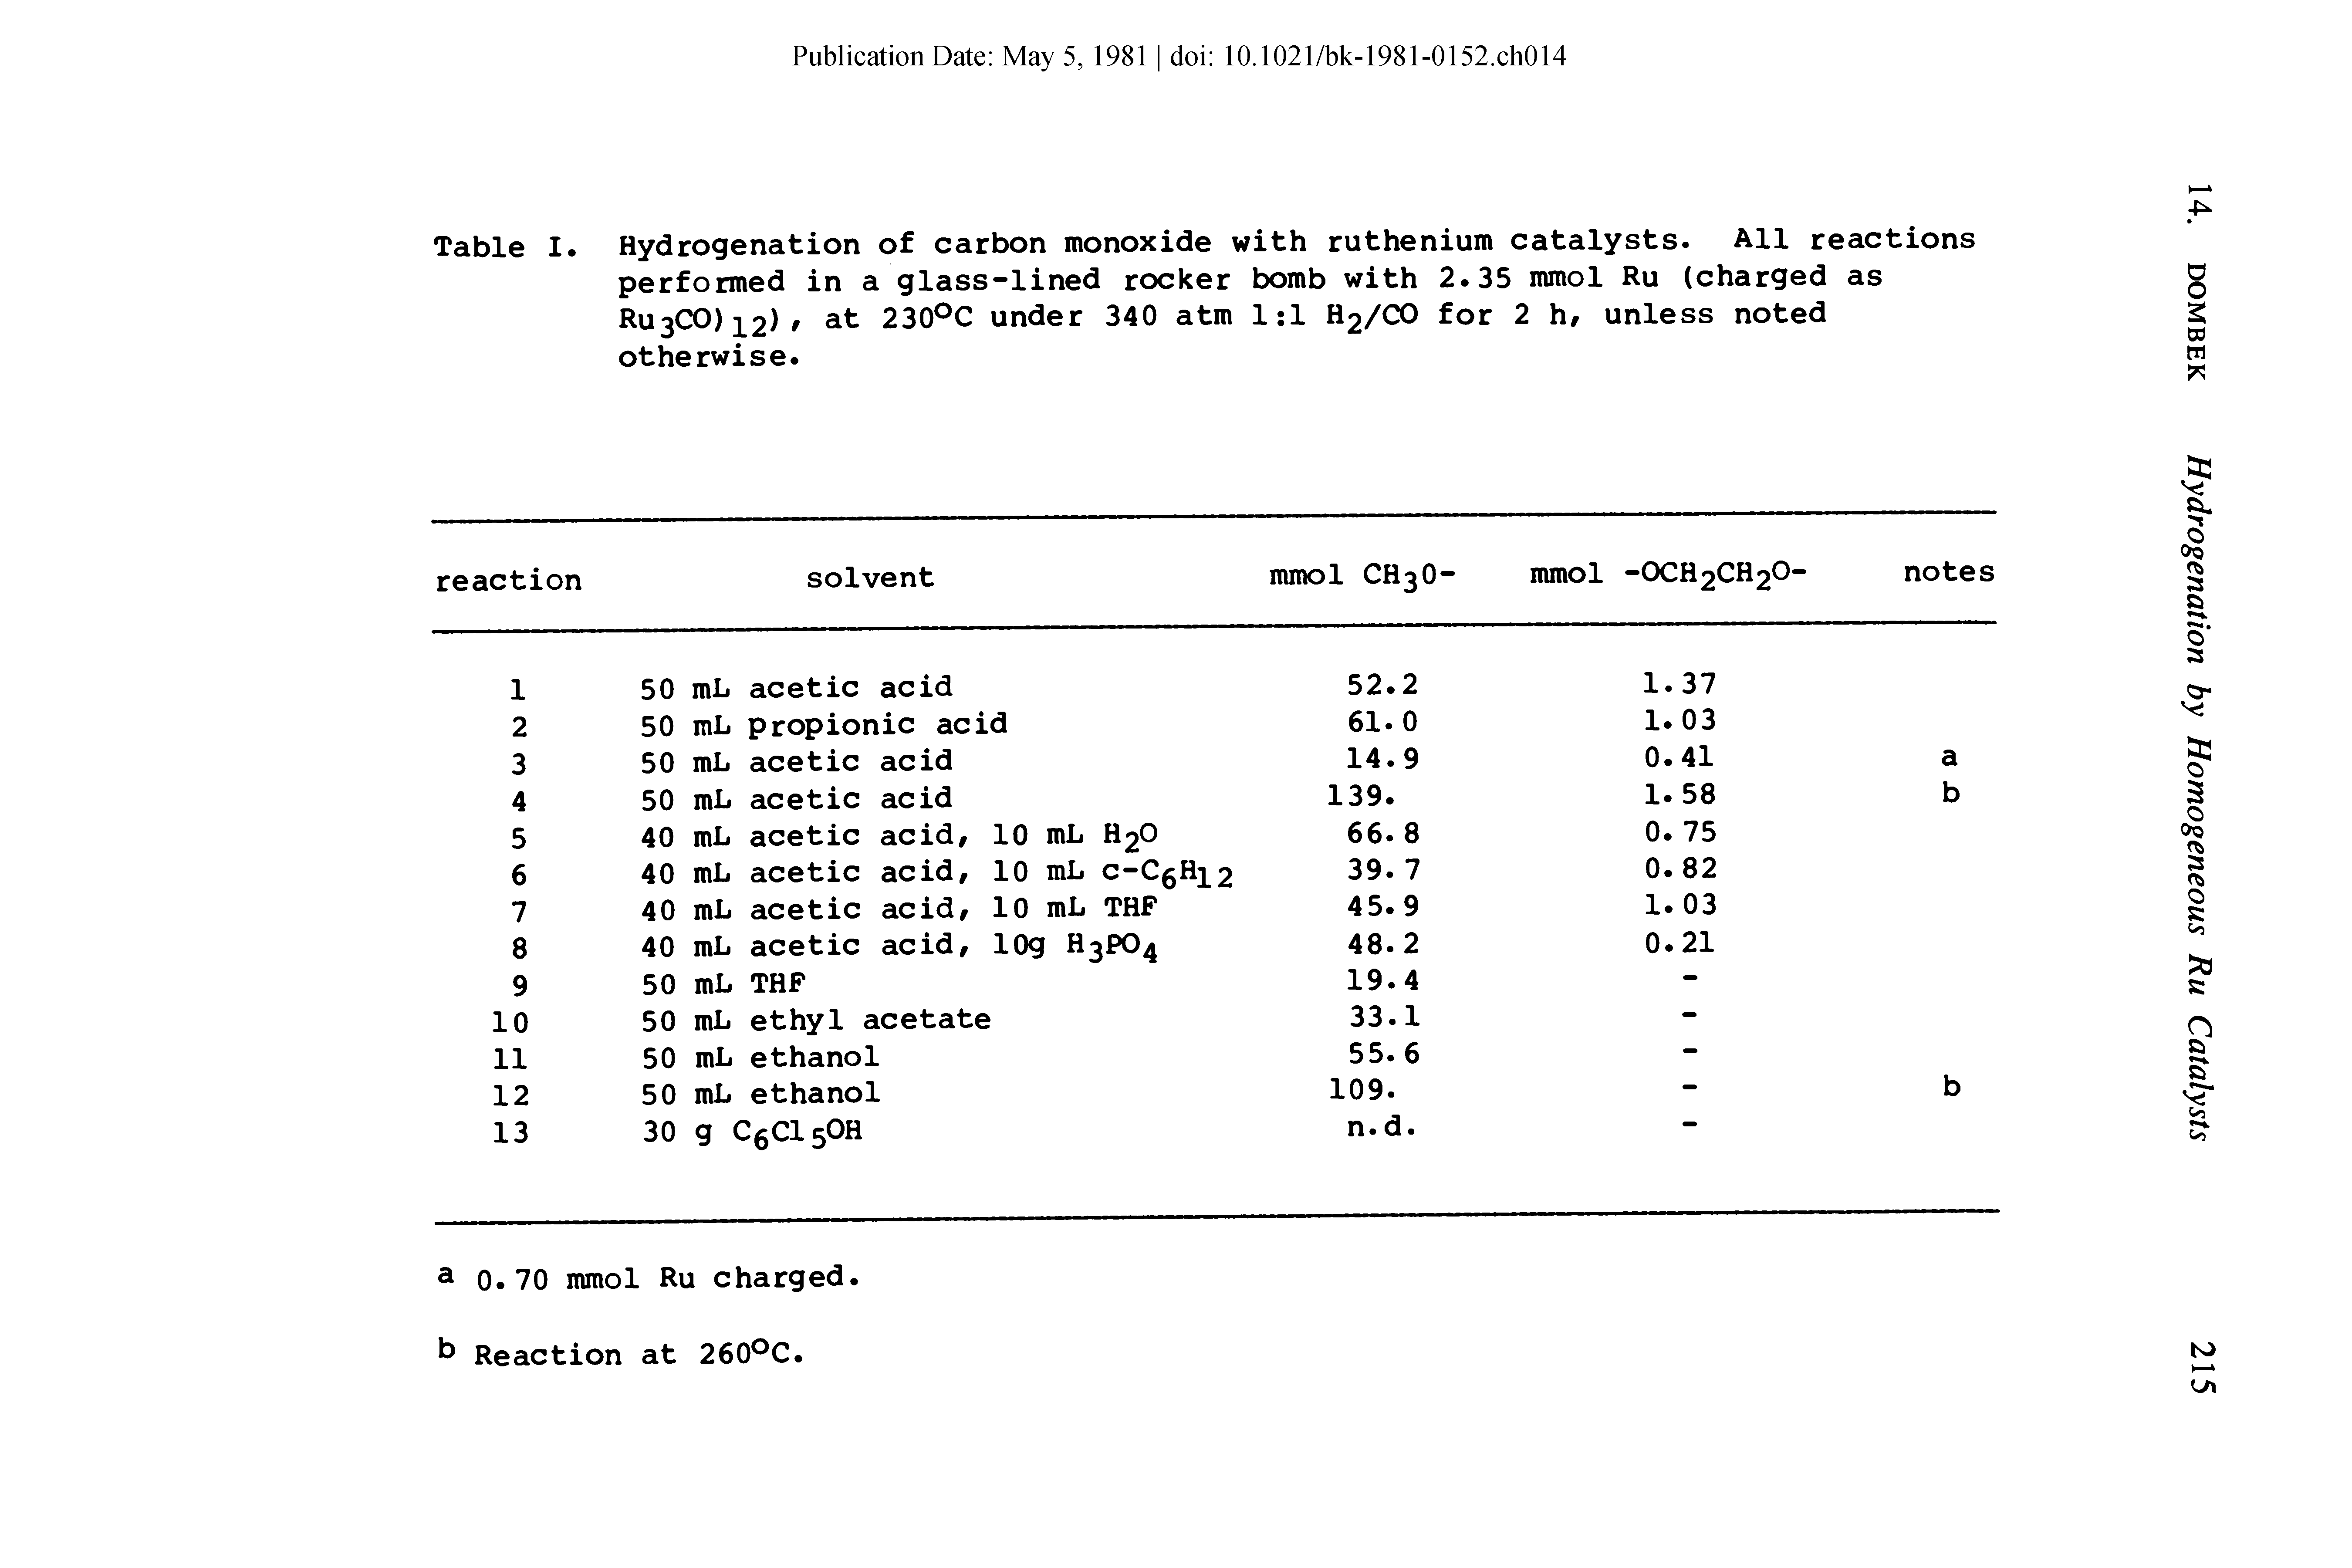 Table I. Hydrogenation of carbon monoxide with ruthenium catalysts. All reactions performed in a glass-lined rocker bomb with 2.35 mmol Ru (charged as RU3CO) 2), at 230°C under 340 atm 1 1 H2/CO for 2 h, unless noted otherwise.